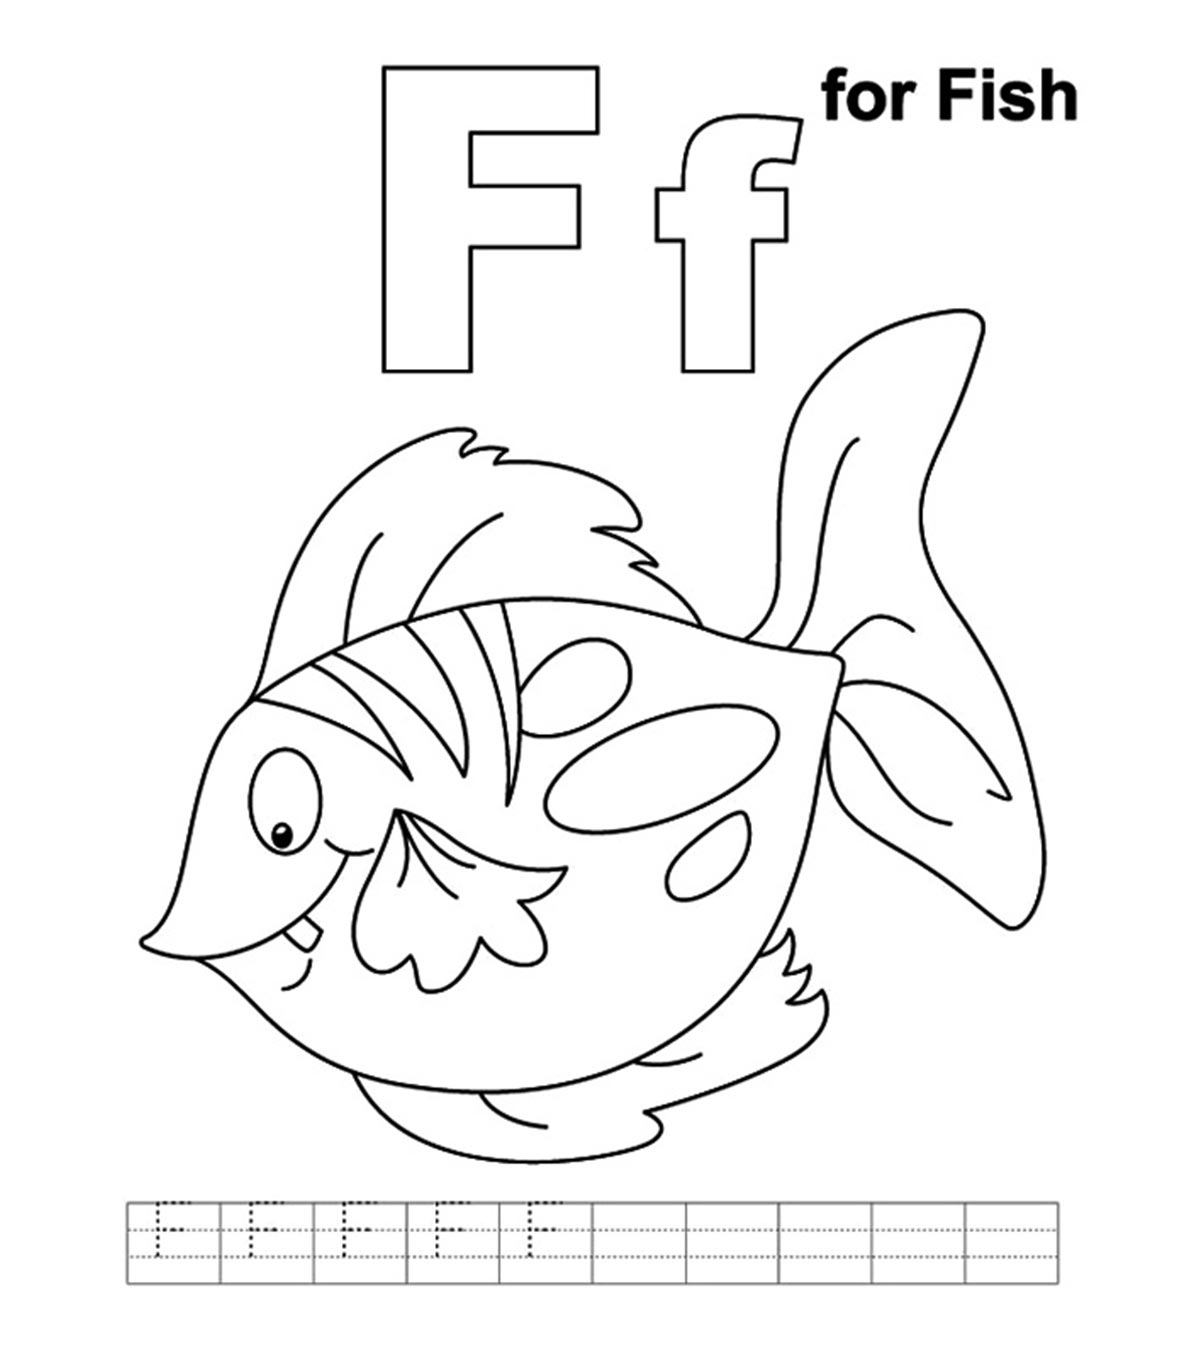 Top 25 Fish Coloring Pages For Your Little Ones